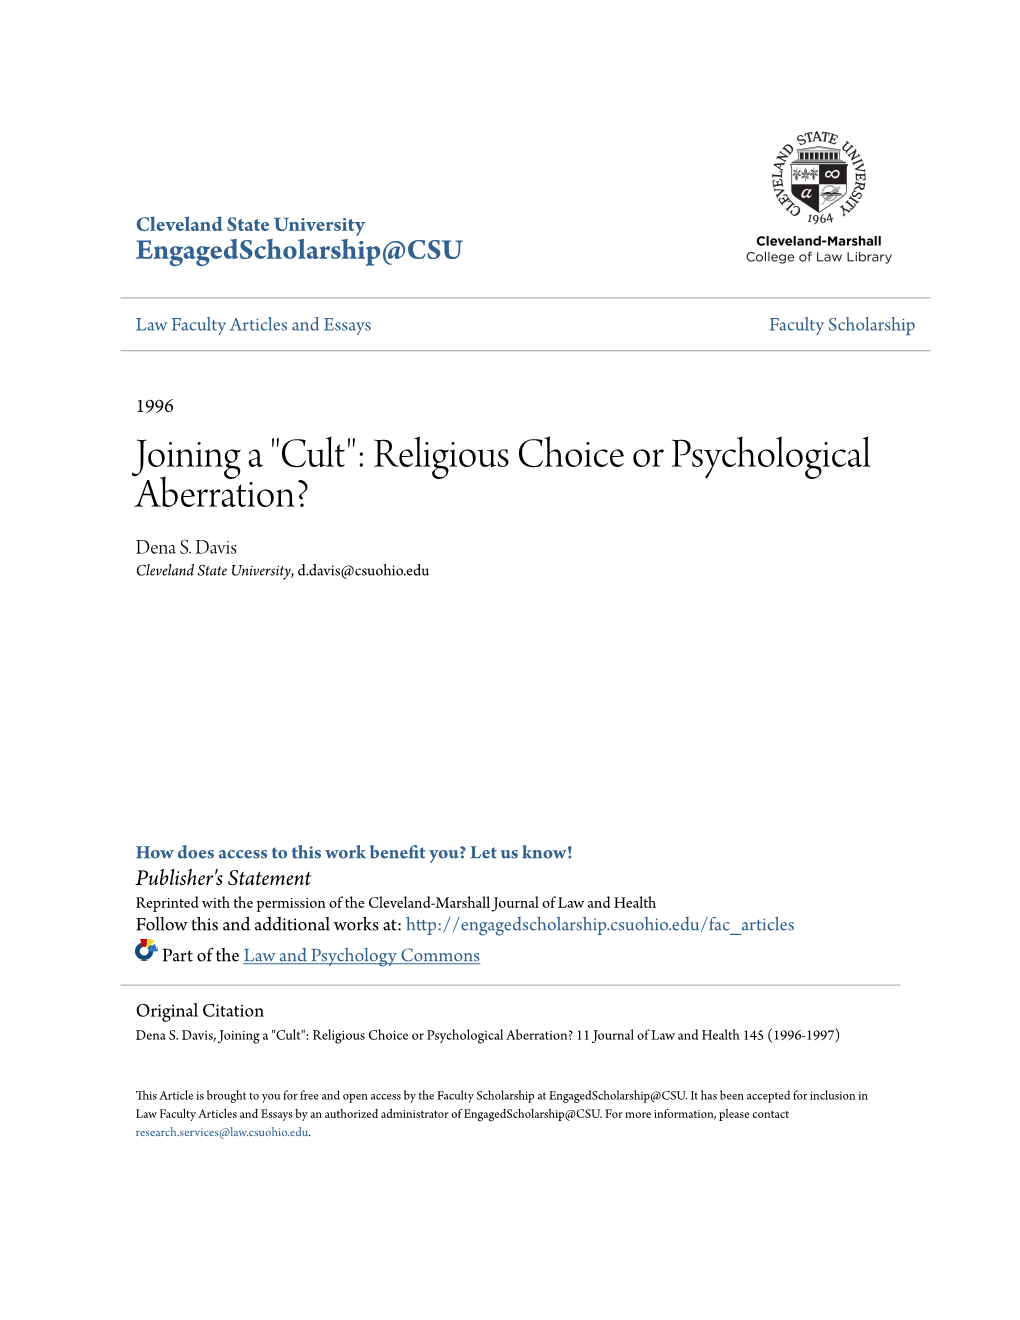 Joining a "Cult": Religious Choice Or Psychological Aberration? Dena S